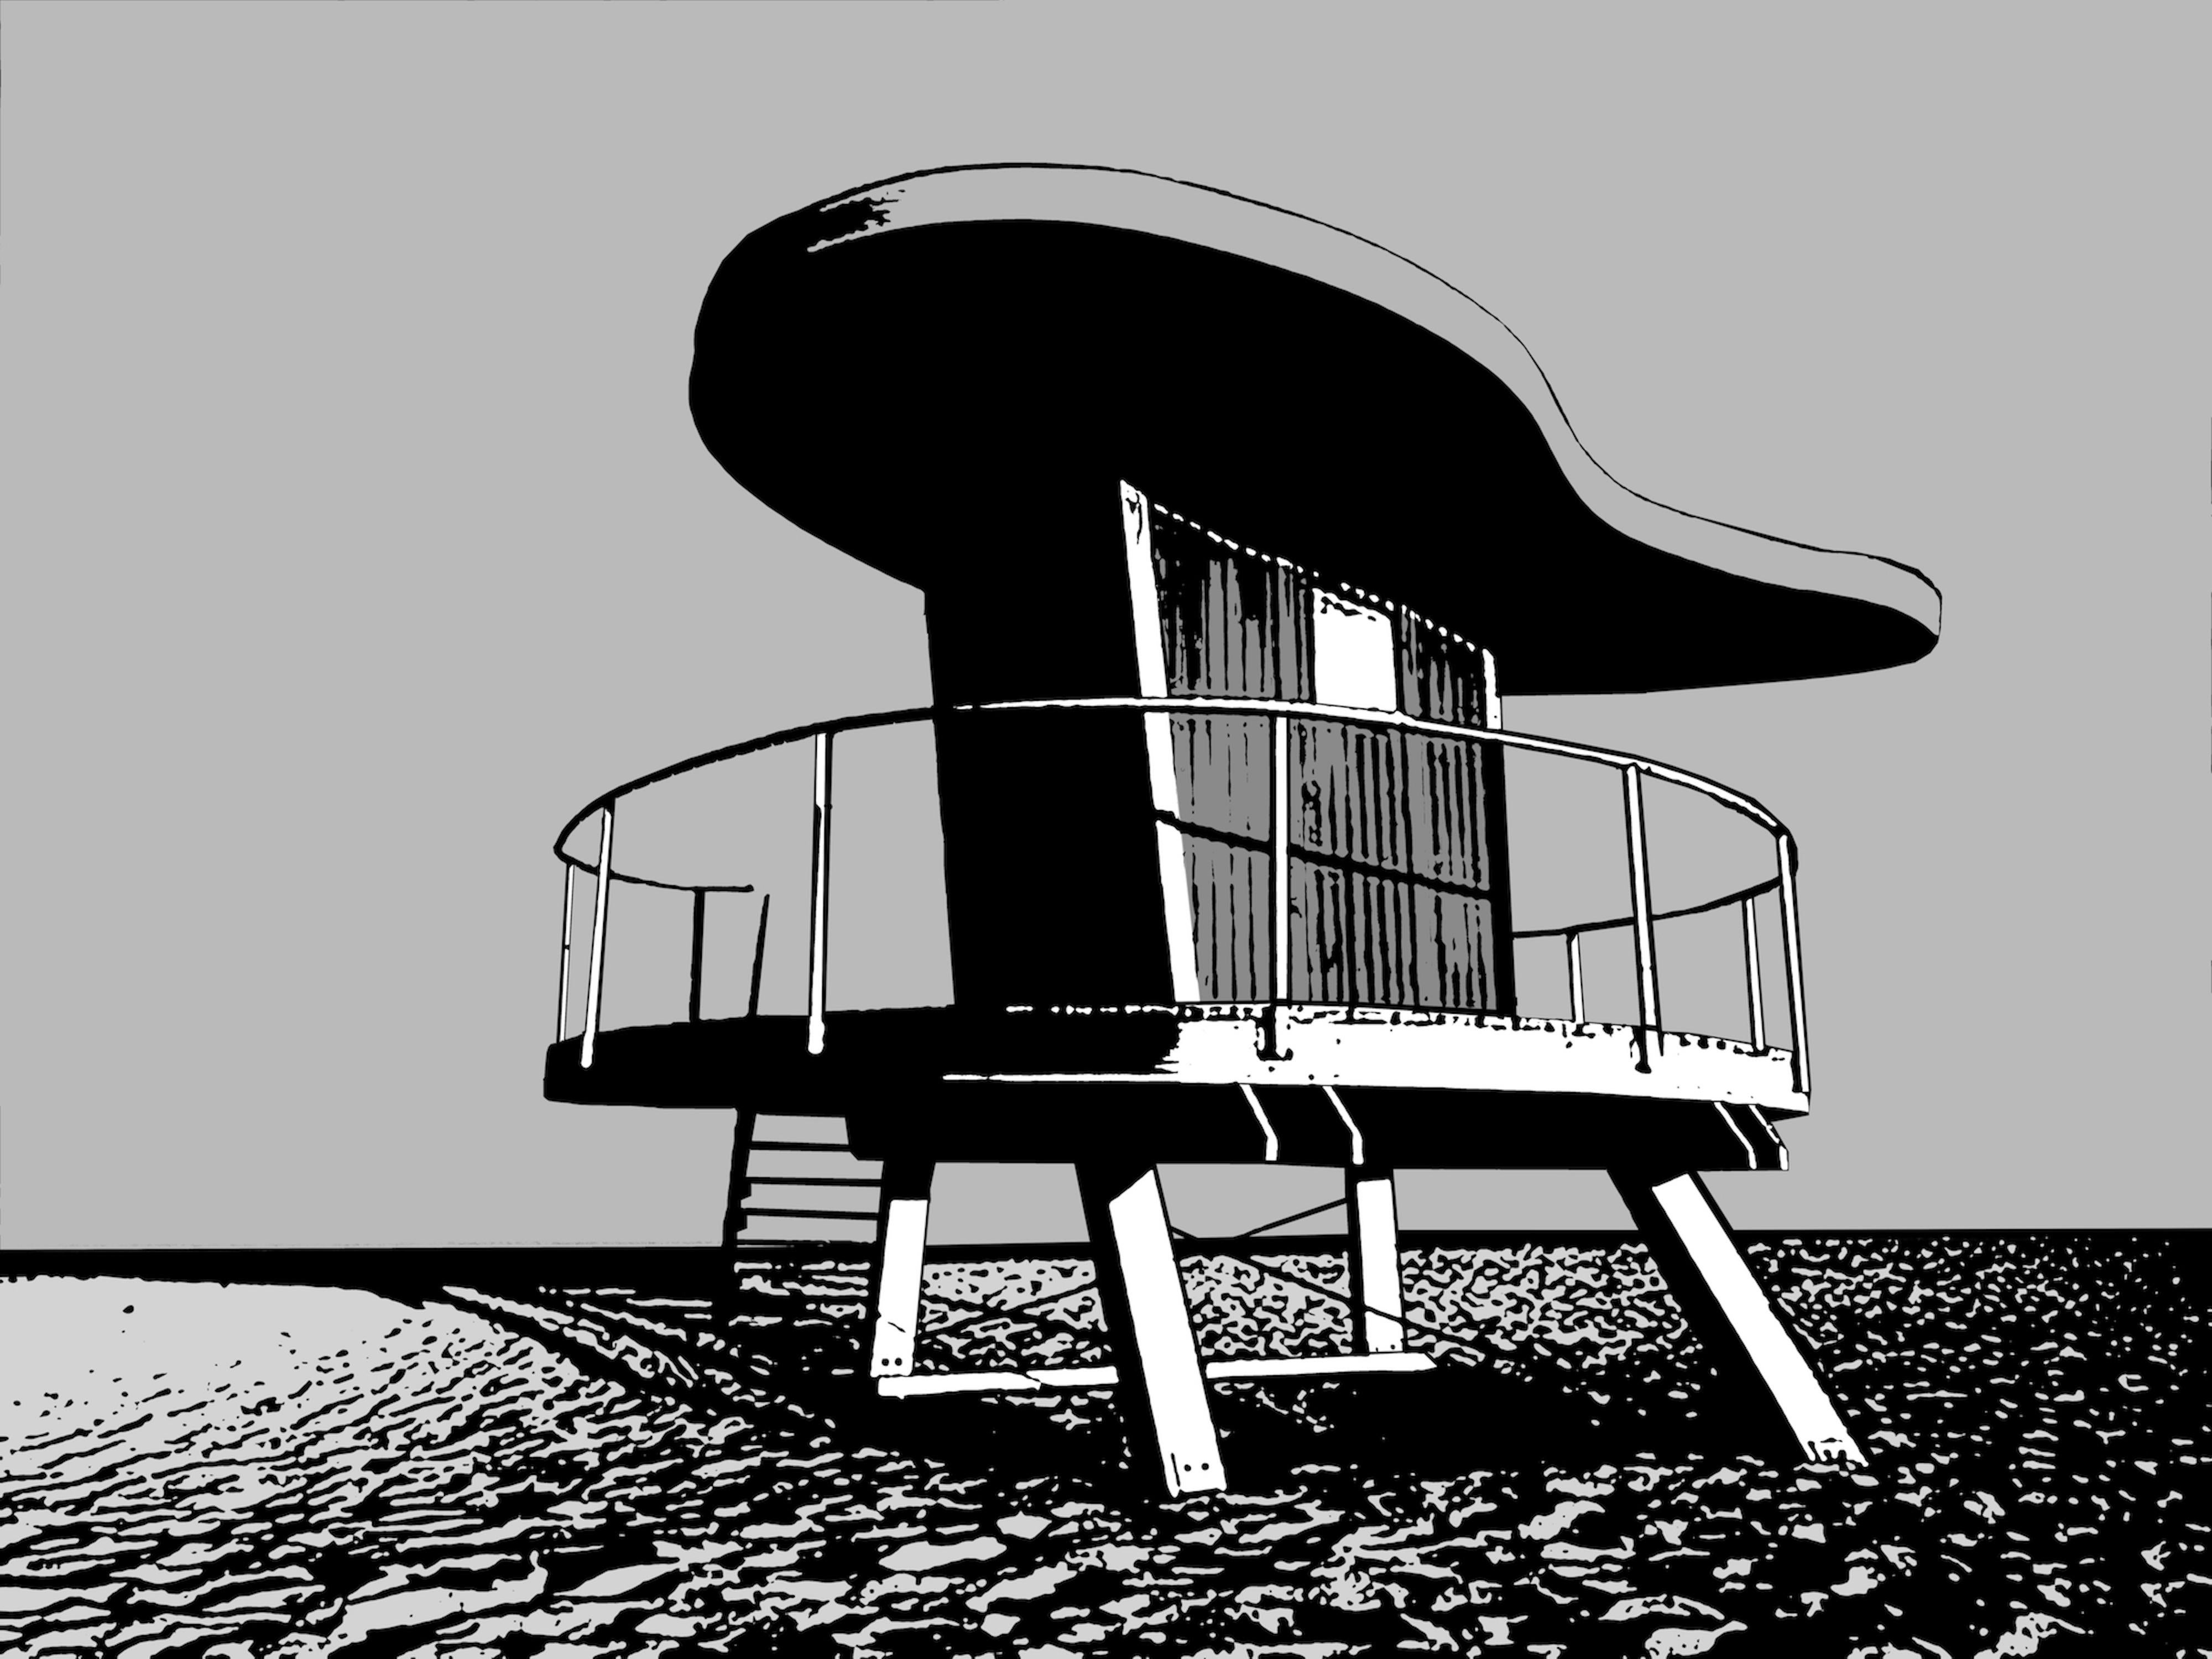 Richard Scudder, Miami Beach Lifeguard Stand #9. - In Black & White. Hand Signed And Numbered By The Artist. Black & White Serigraph. 

:: Hand Printed Work :: Art Deco/Art Nouveau :: This piece comes with an official certificate of authenticity